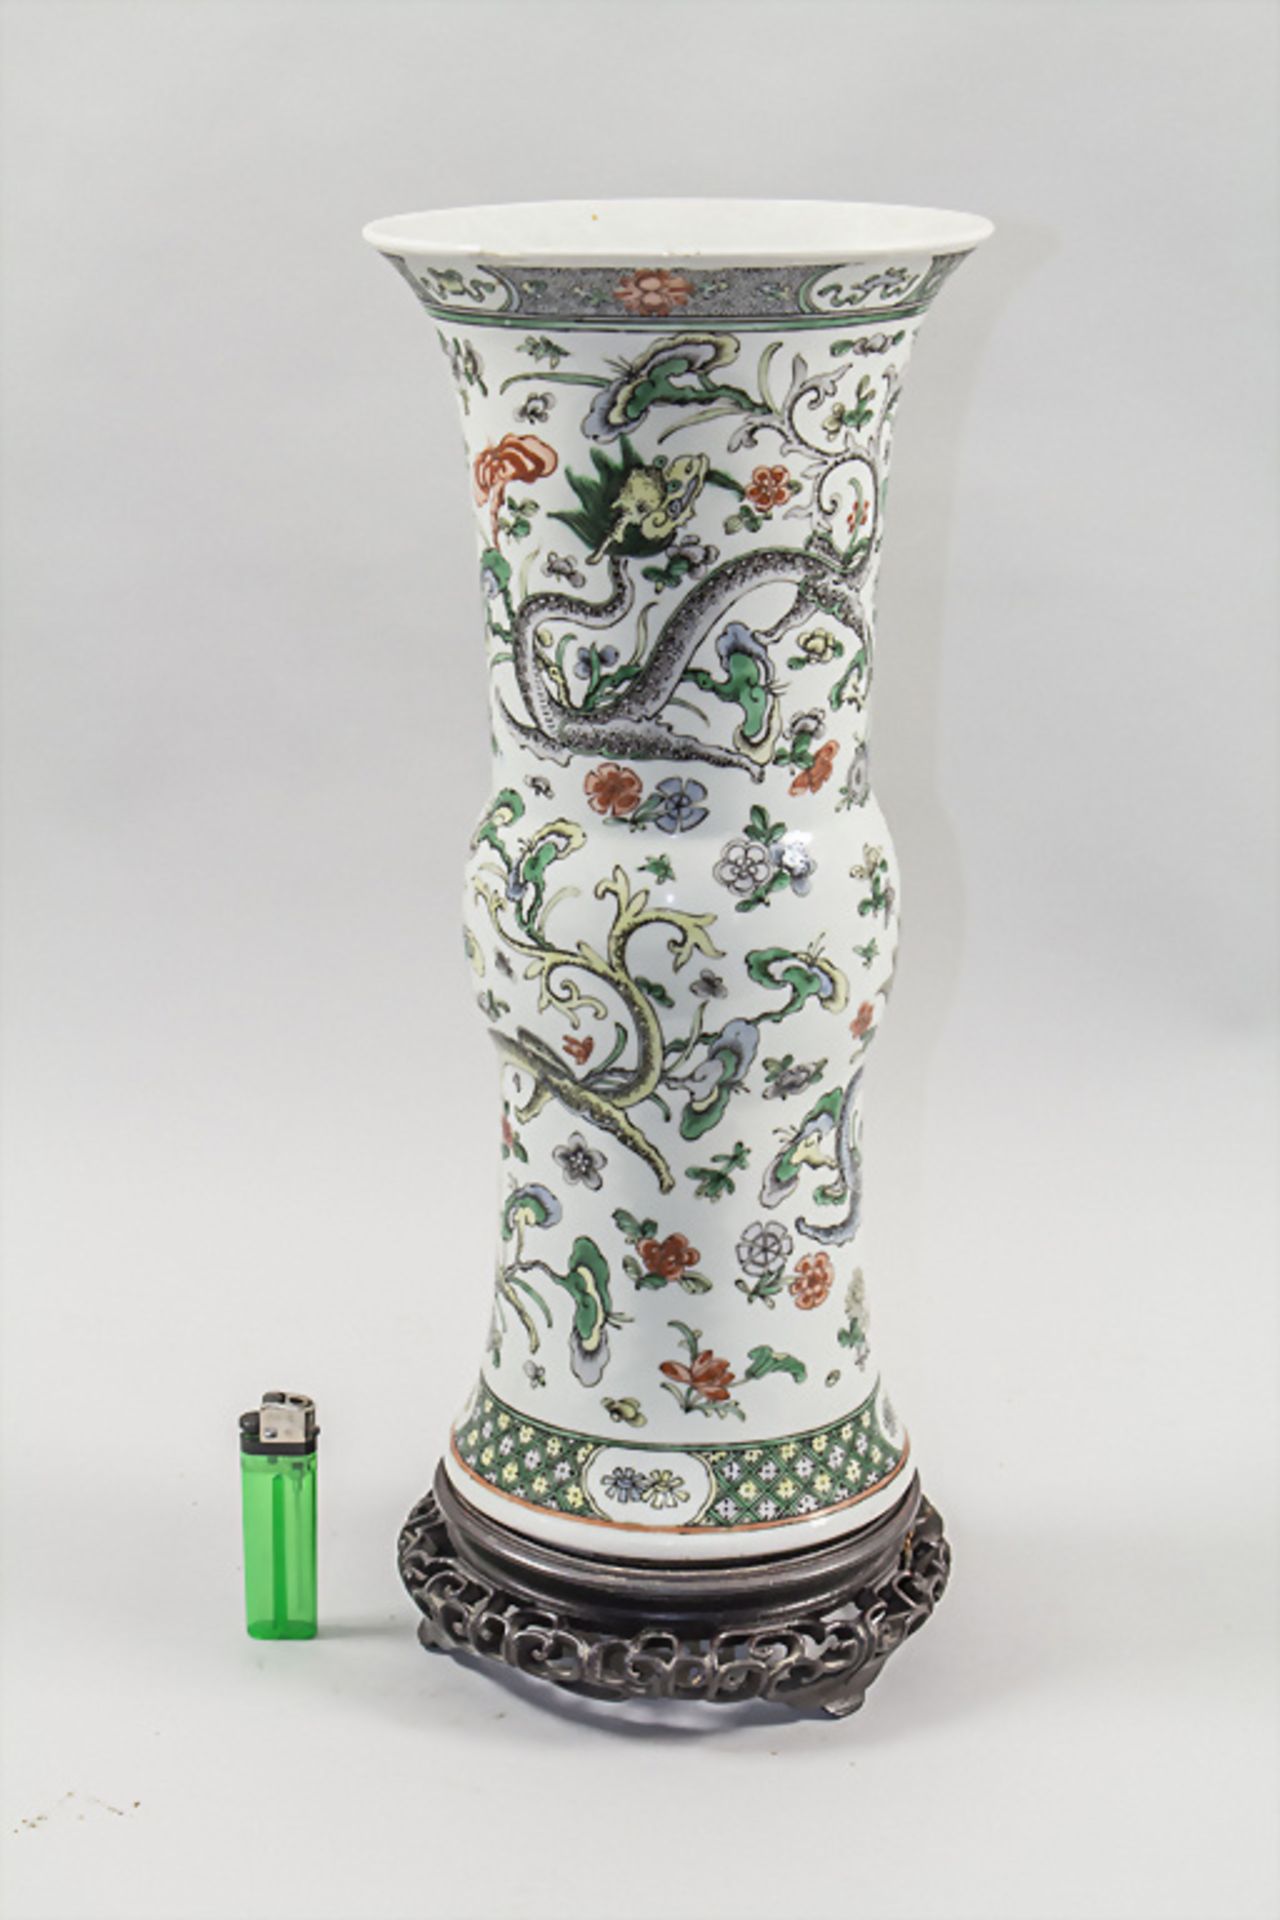 Vase mit Holzstand / A vase with wooden stand, China, Qing-Dynastie (1644-1911), 18./19. Jh. - Bild 2 aus 7